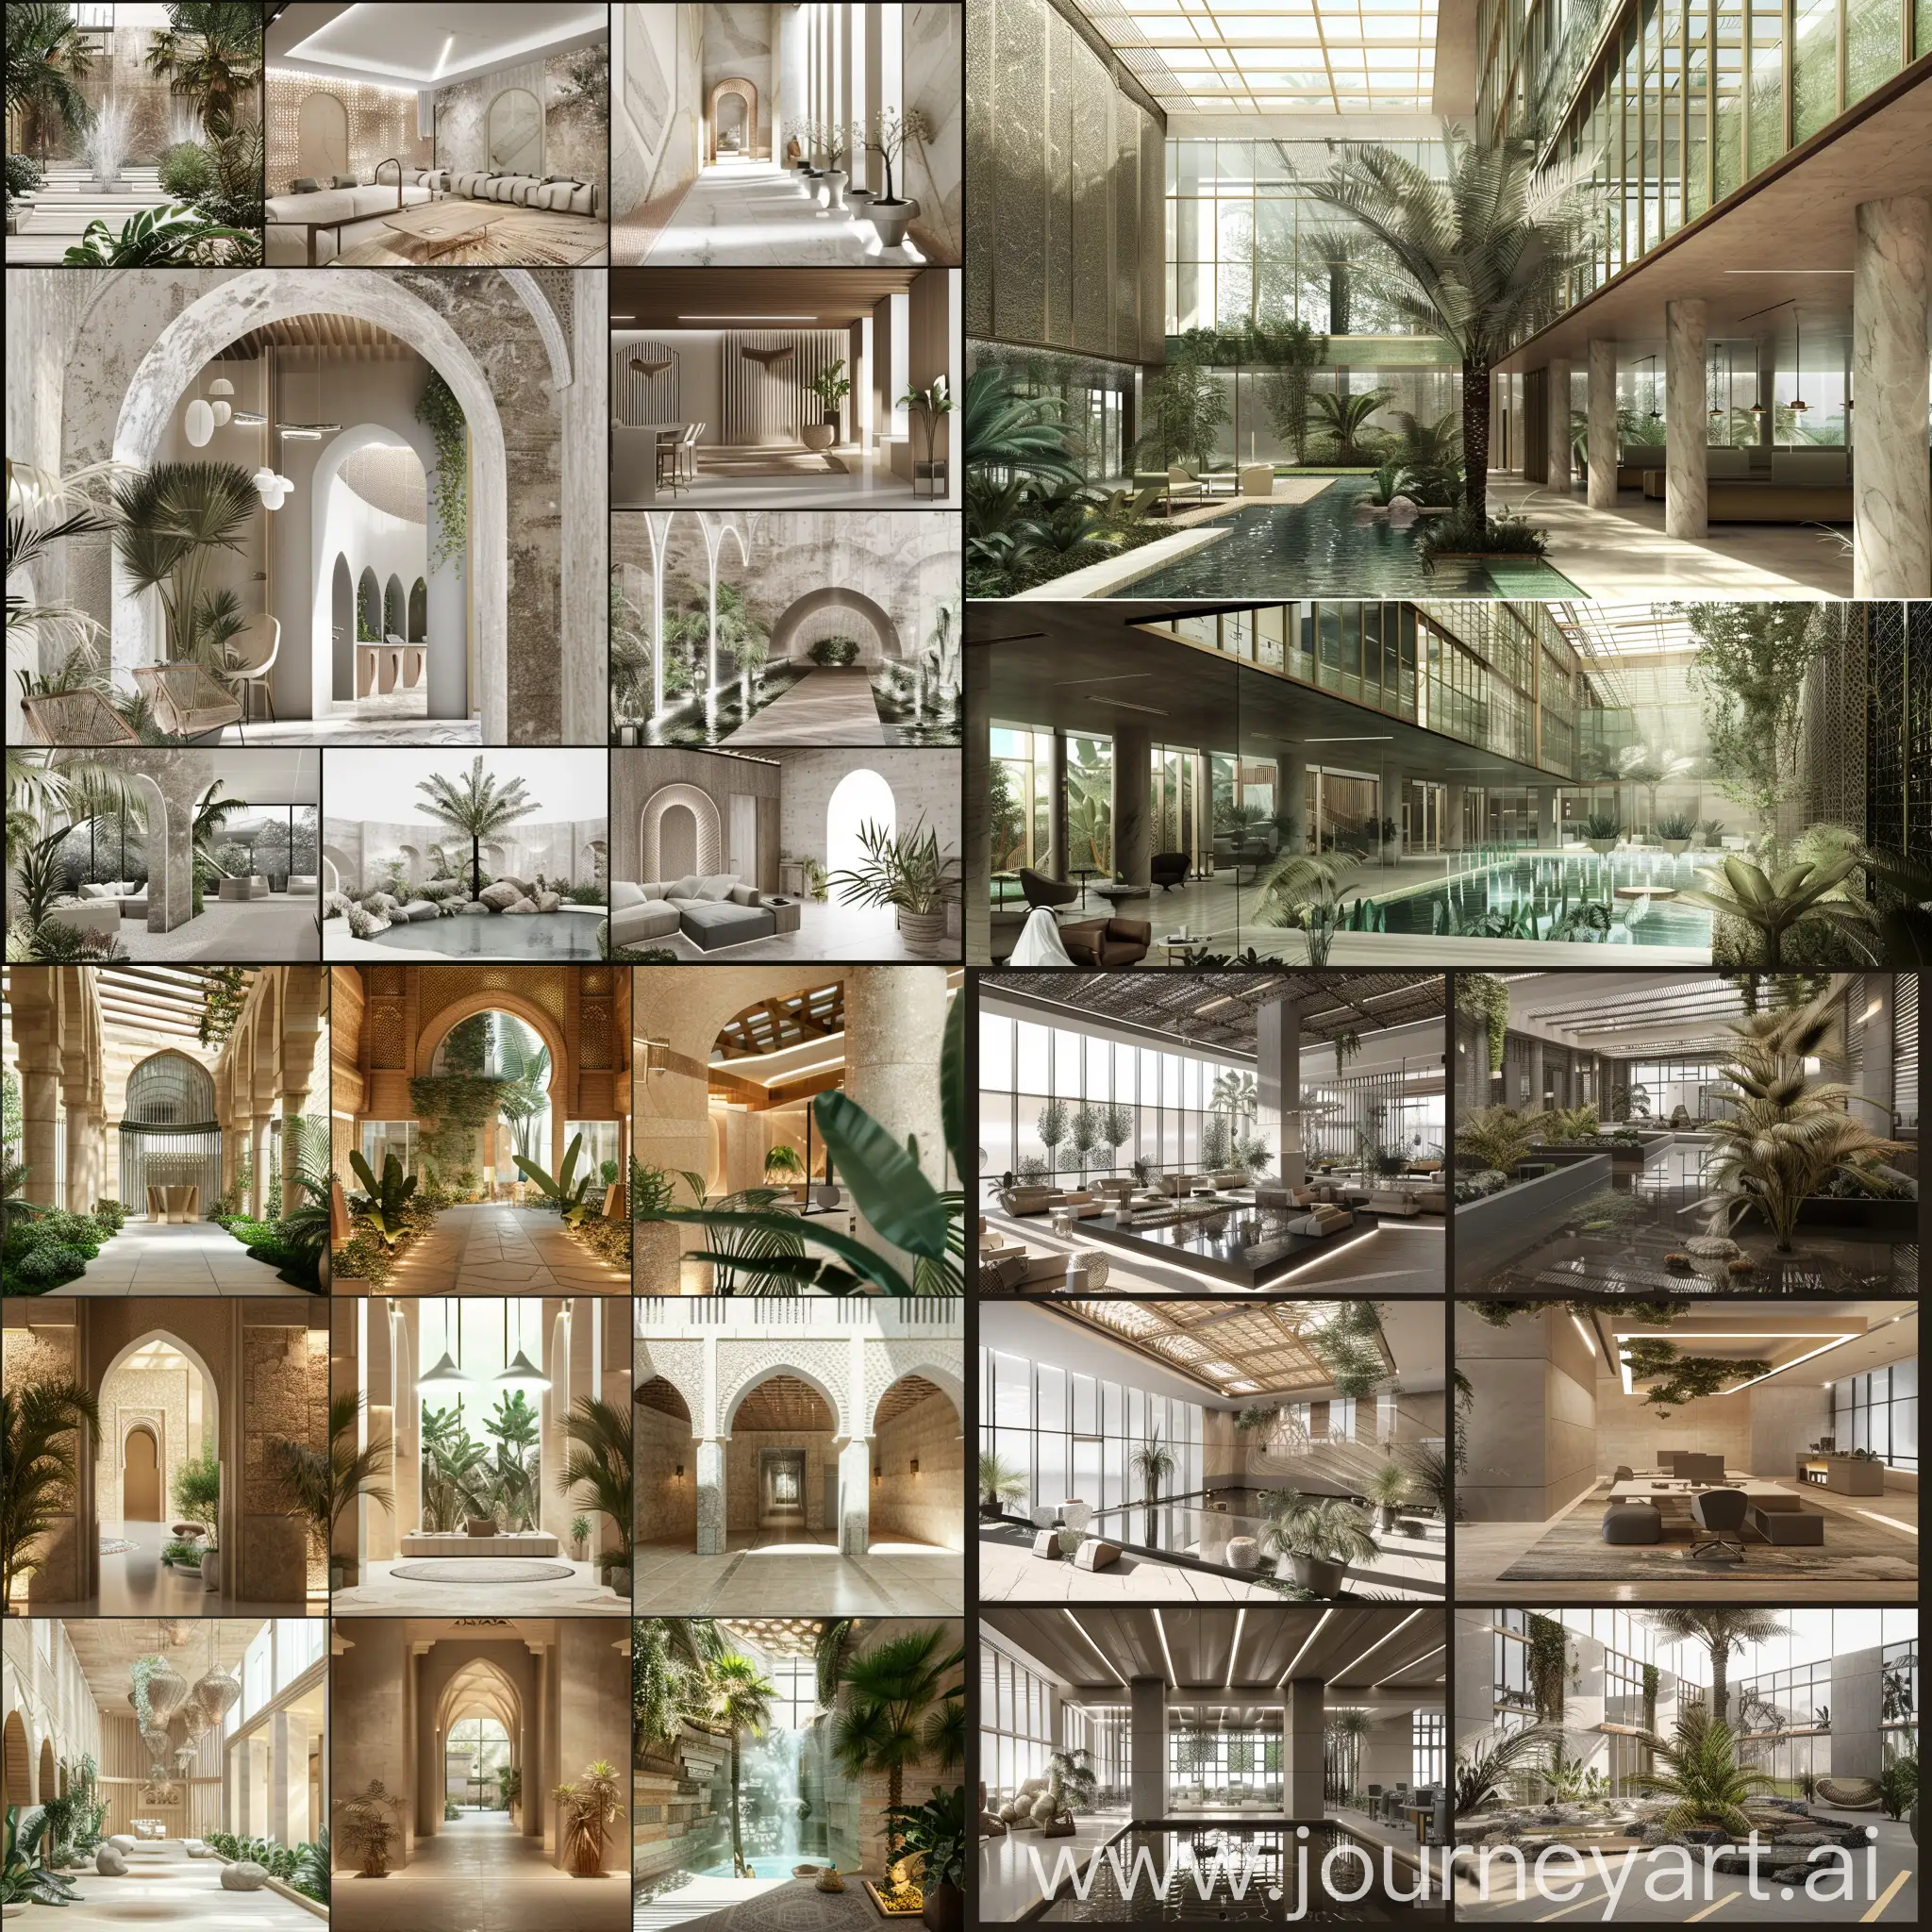 can you generate an interior shots for office building at Saudi Arabia with a concept of reviving KSA heritage with a modern way with an oasis inside the building concept, generate in a mood board 